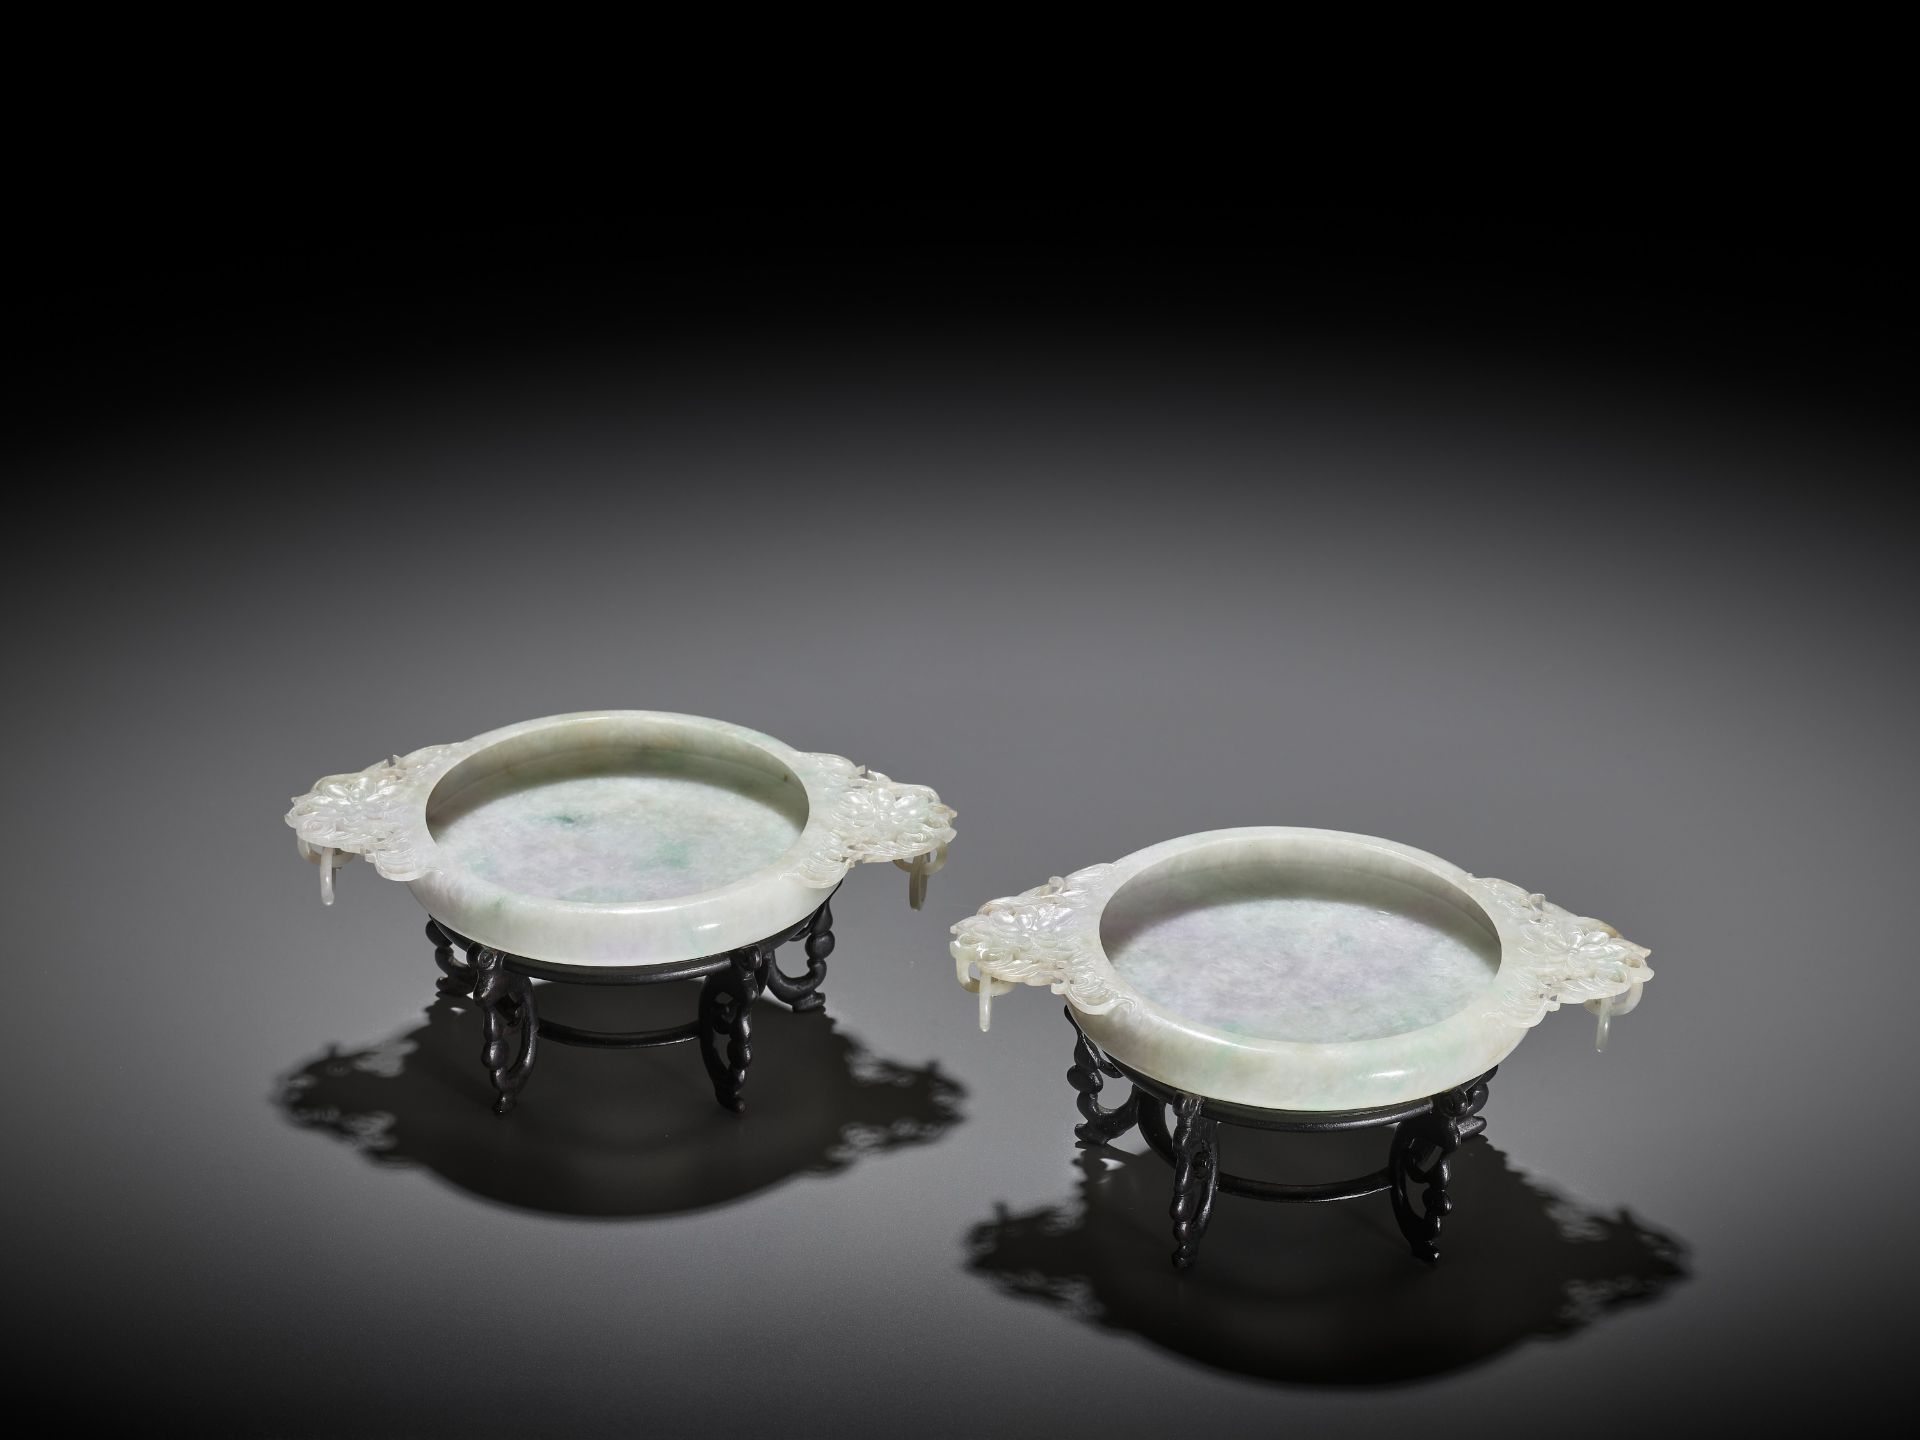 A PAIR OF RARE MUGHAL-STYLE JADEITE MARRIAGE BOWLS, LATE QING DYNASTY - Image 12 of 12